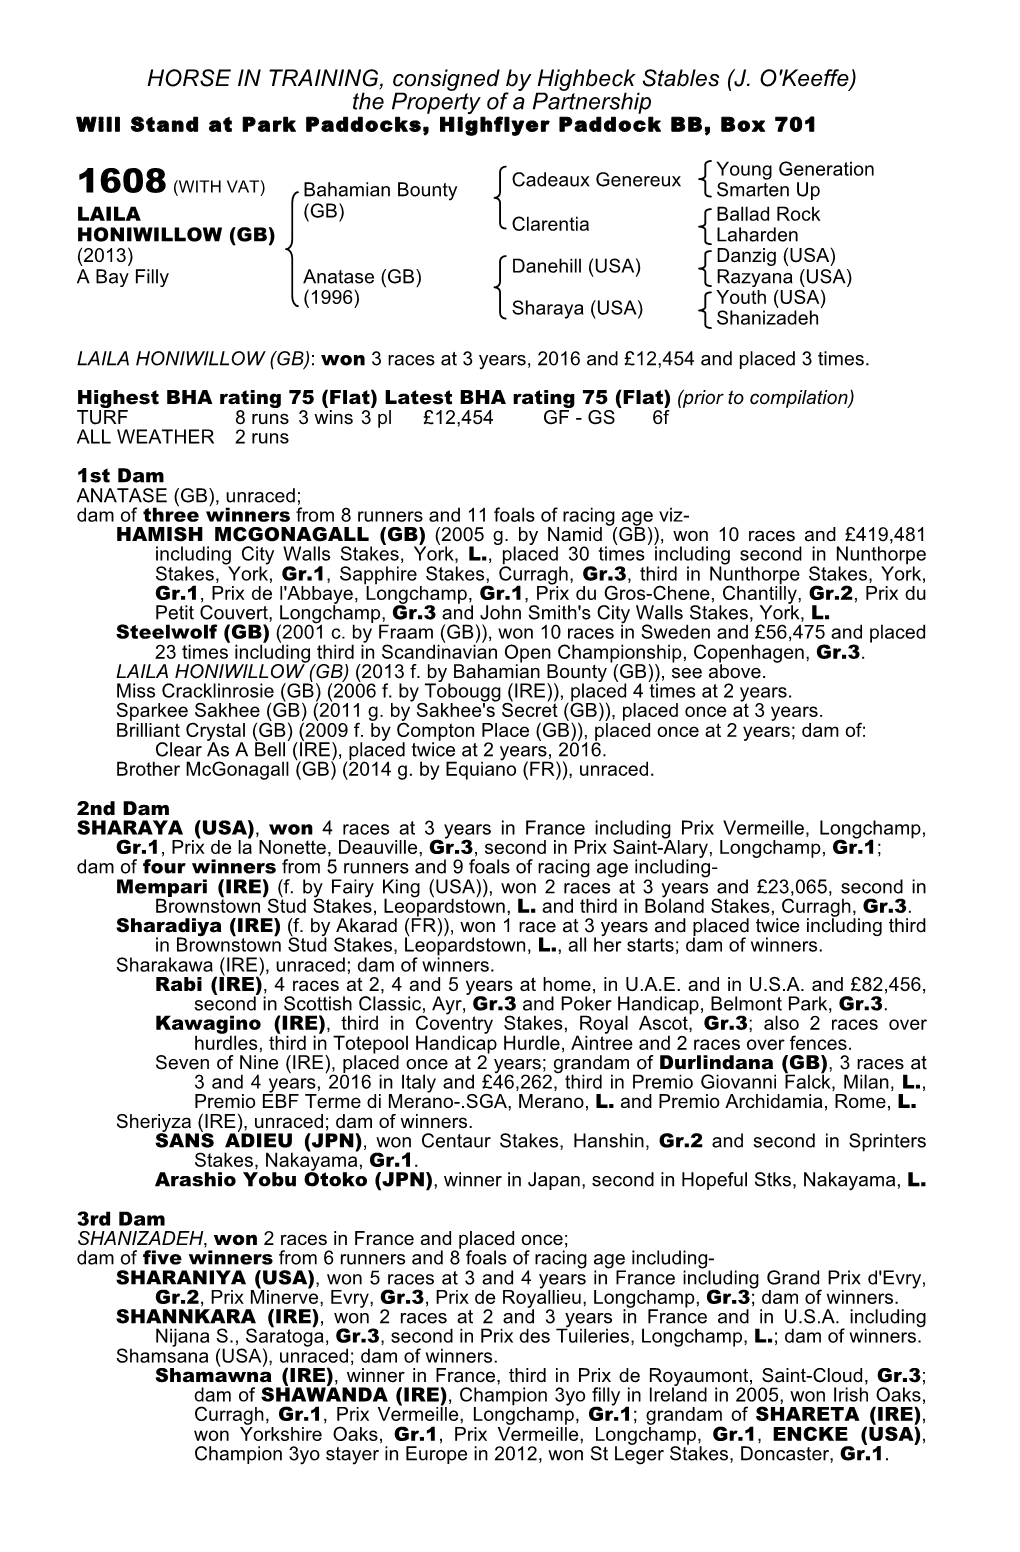 HORSE in TRAINING, Consigned by Highbeck Stables (J